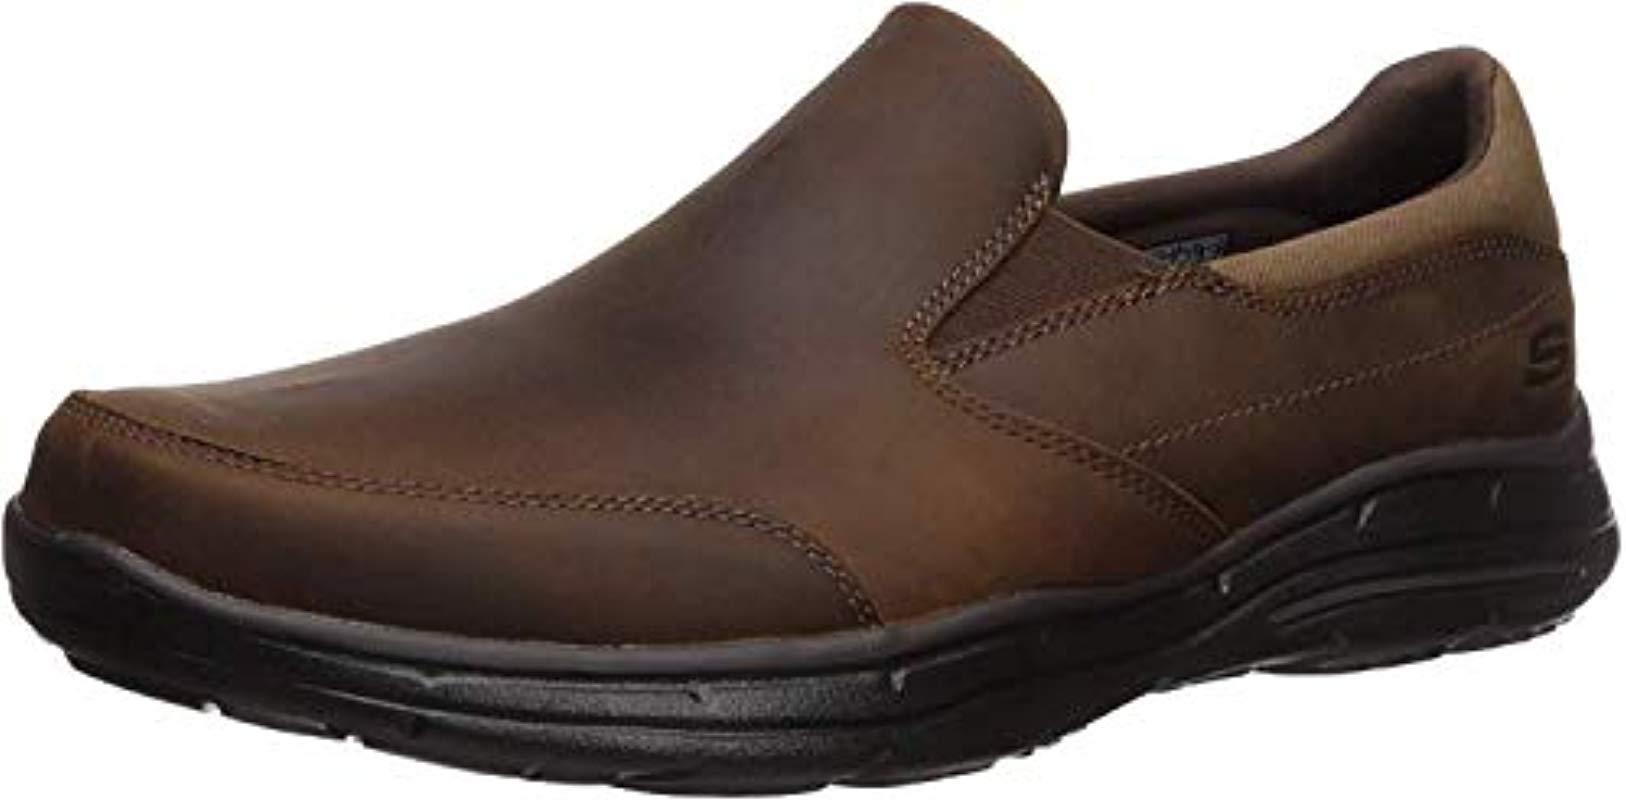 Skechers Relaxed Fit Glides Calculous in Dark Brown (Brown) for Men ...